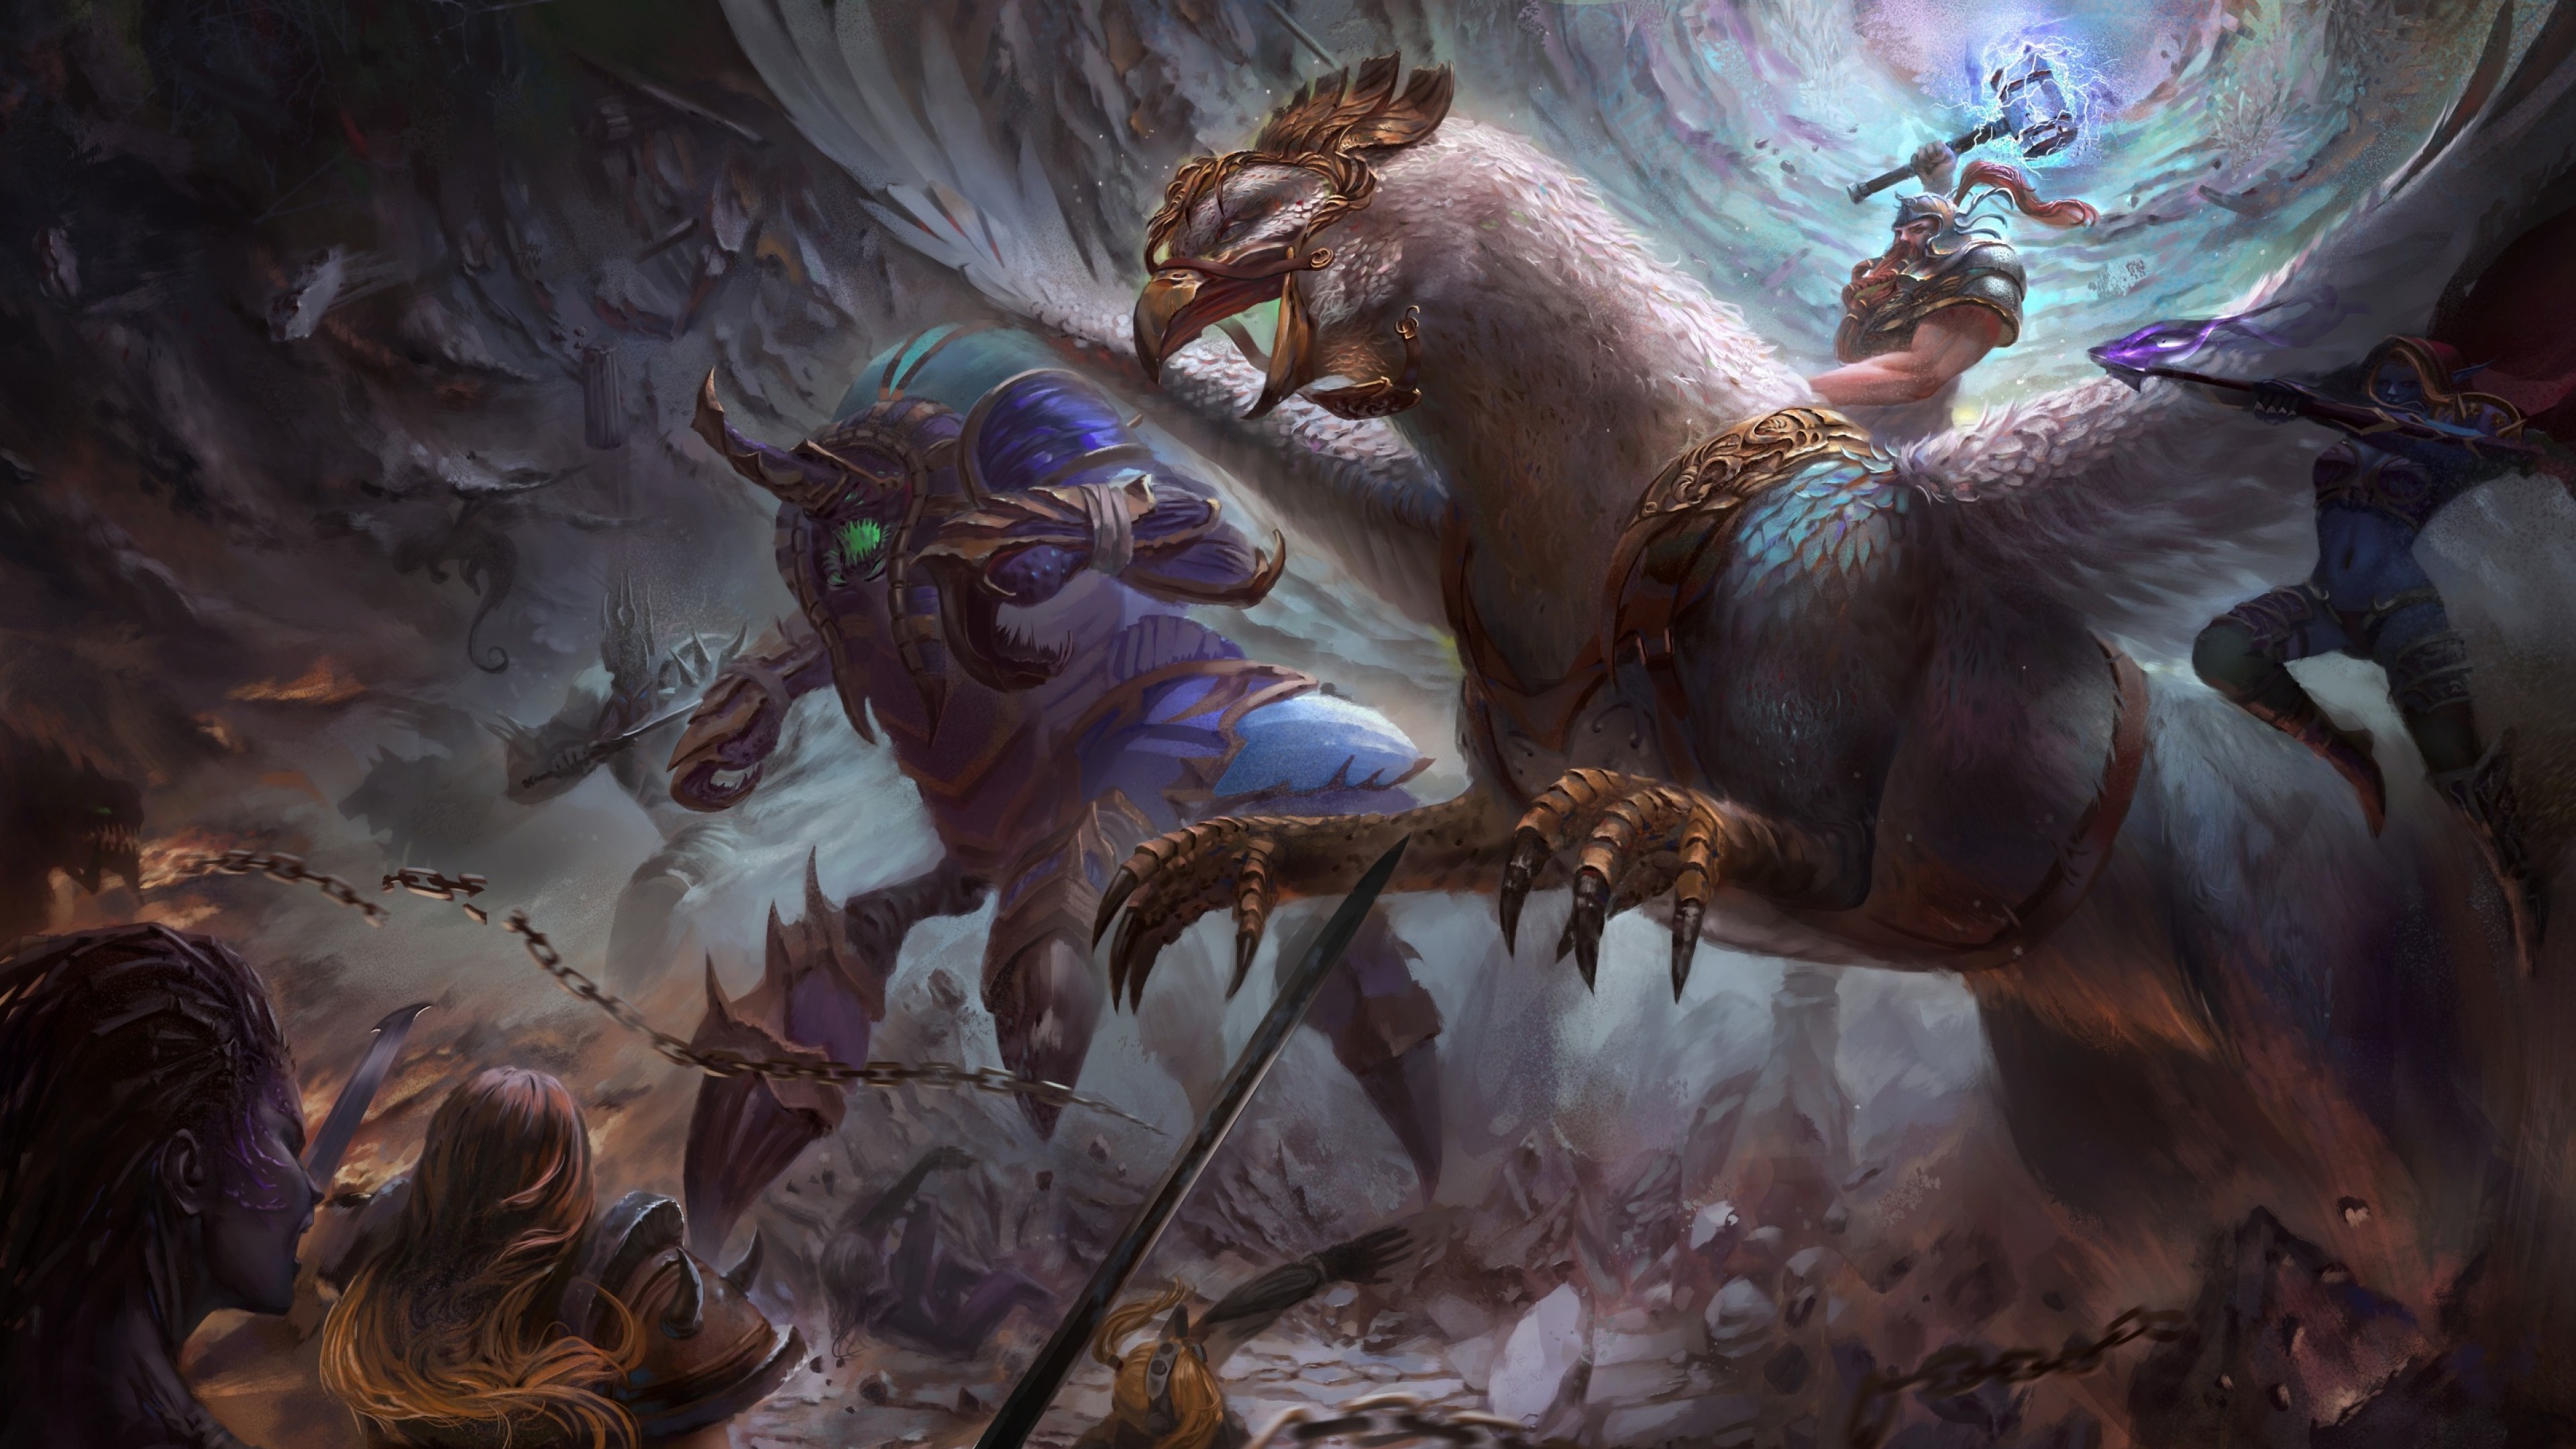 heroes of the storm wallpaper 1920x1080,action adventure game,cg artwork,mythology,fictional character,pc game